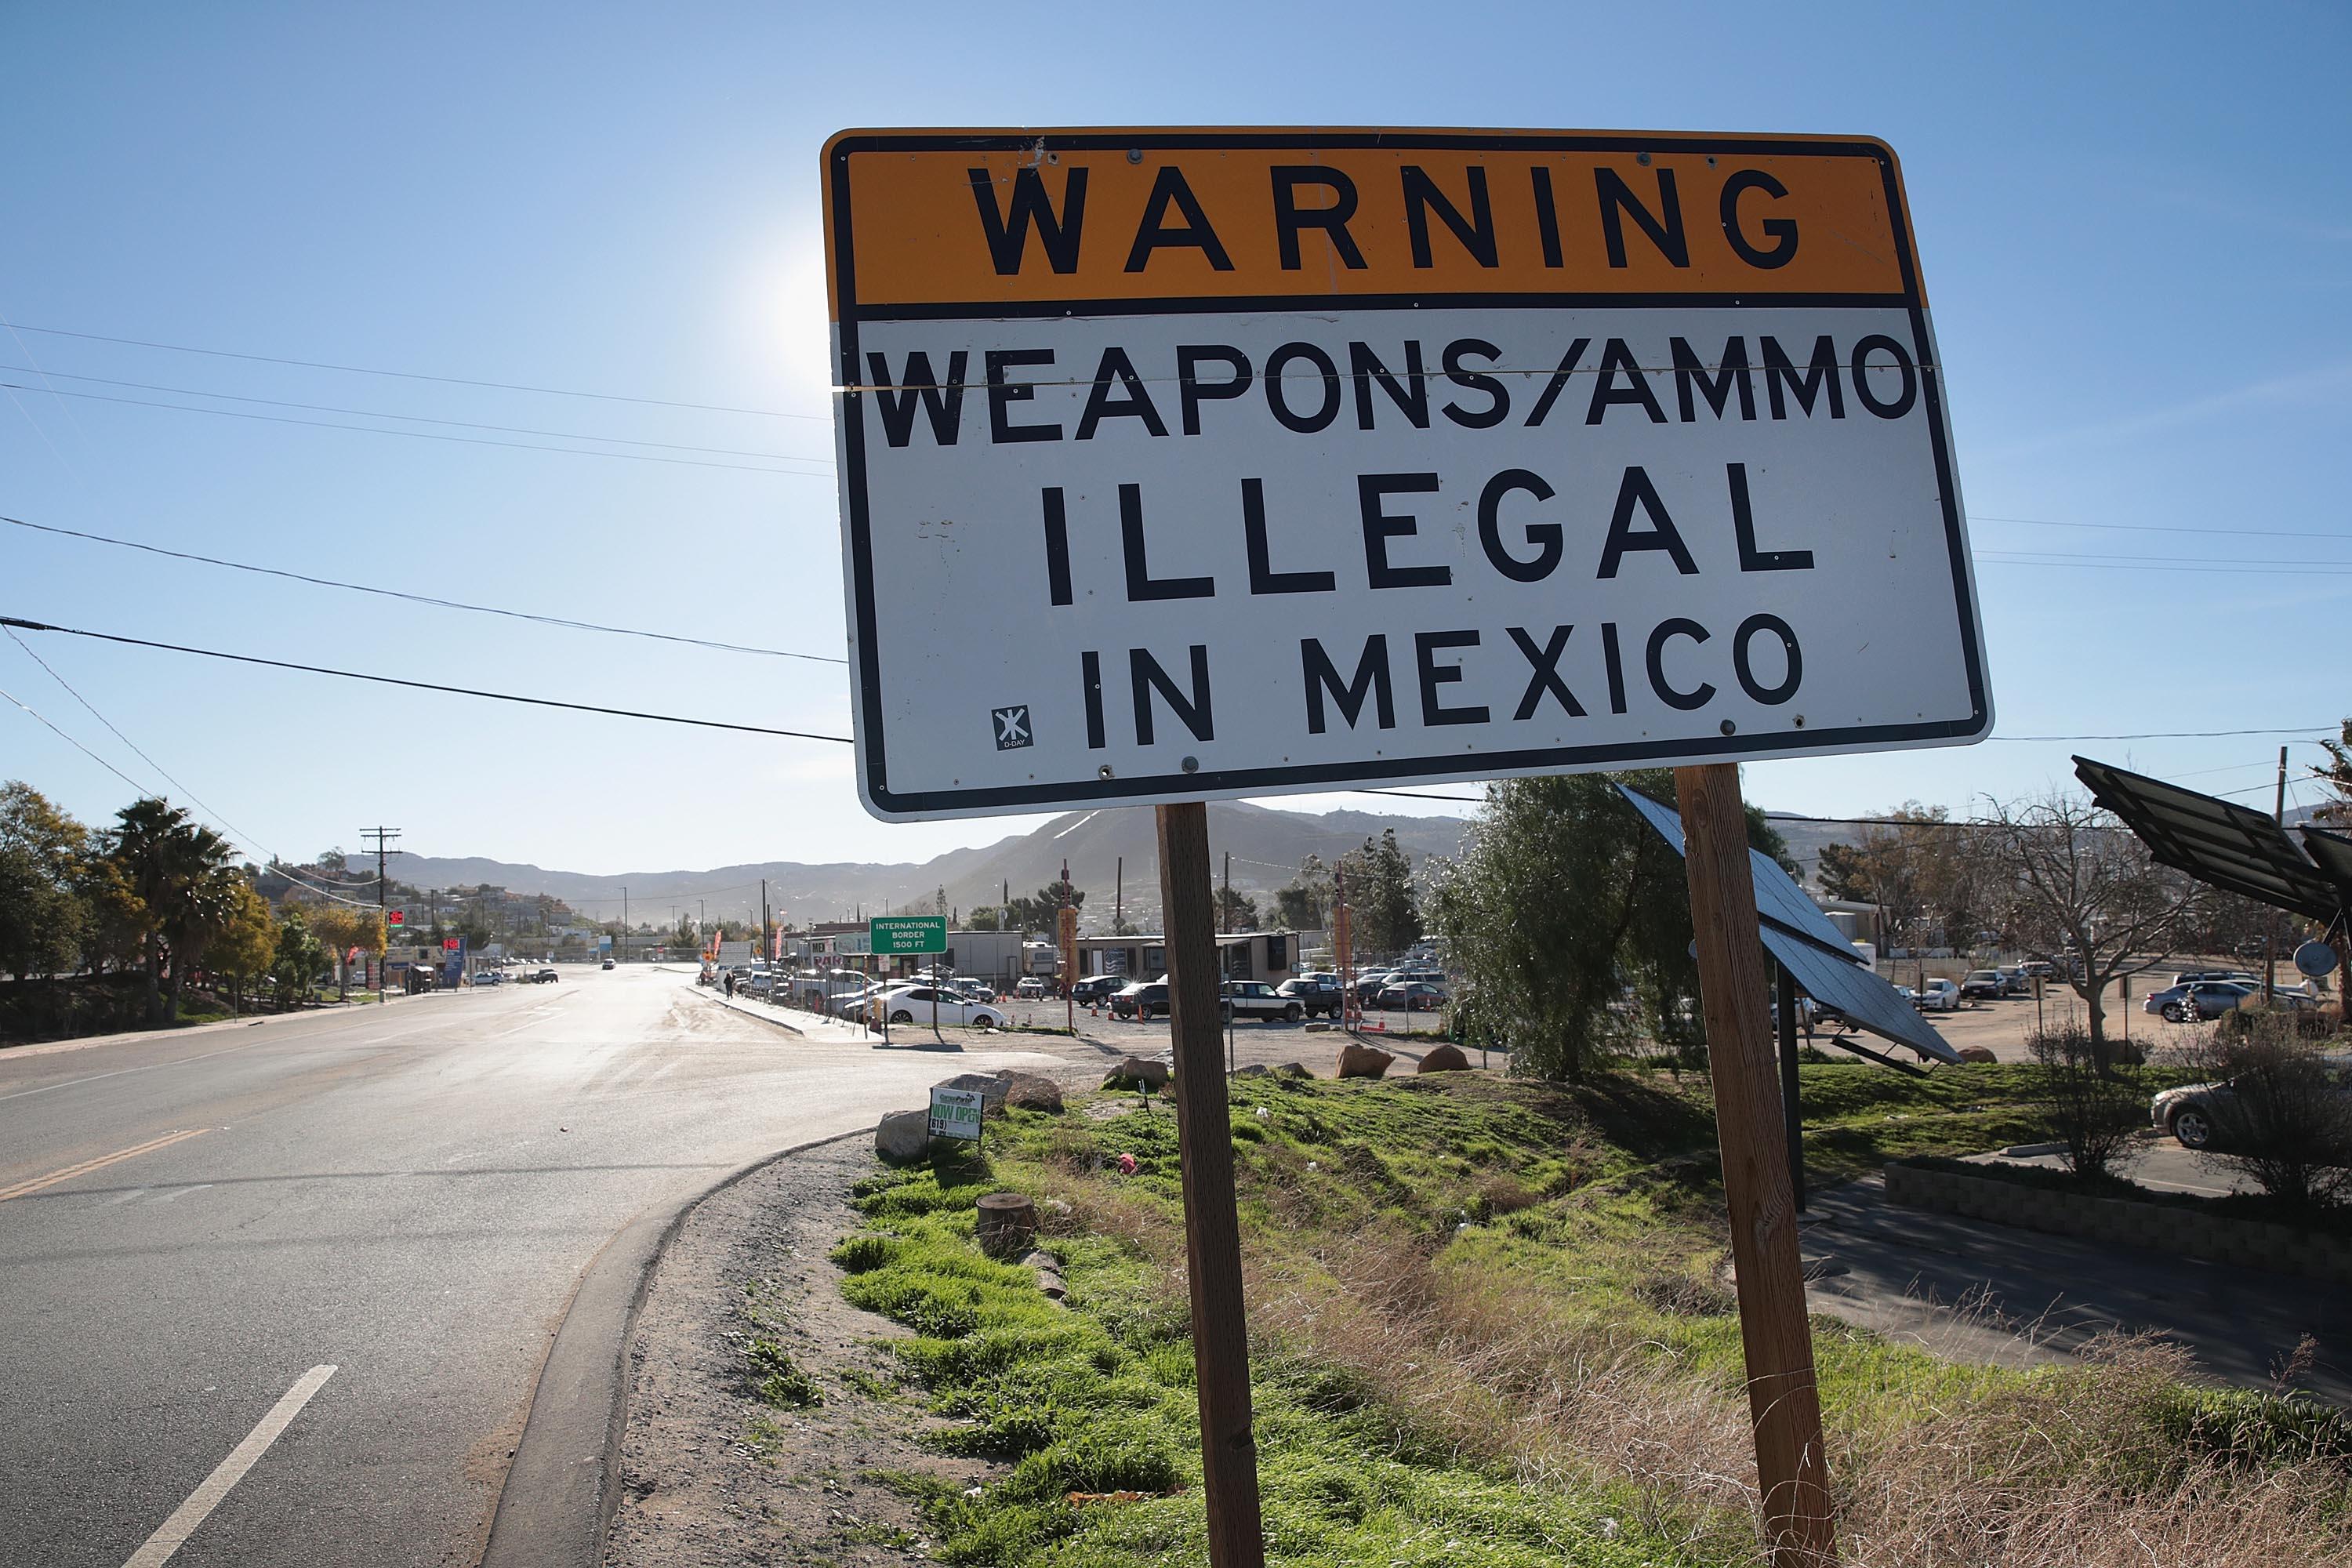 A sign along a road reads, "WARNING: WEAPONS/AMMO ILLEGAL IN MEXICO."